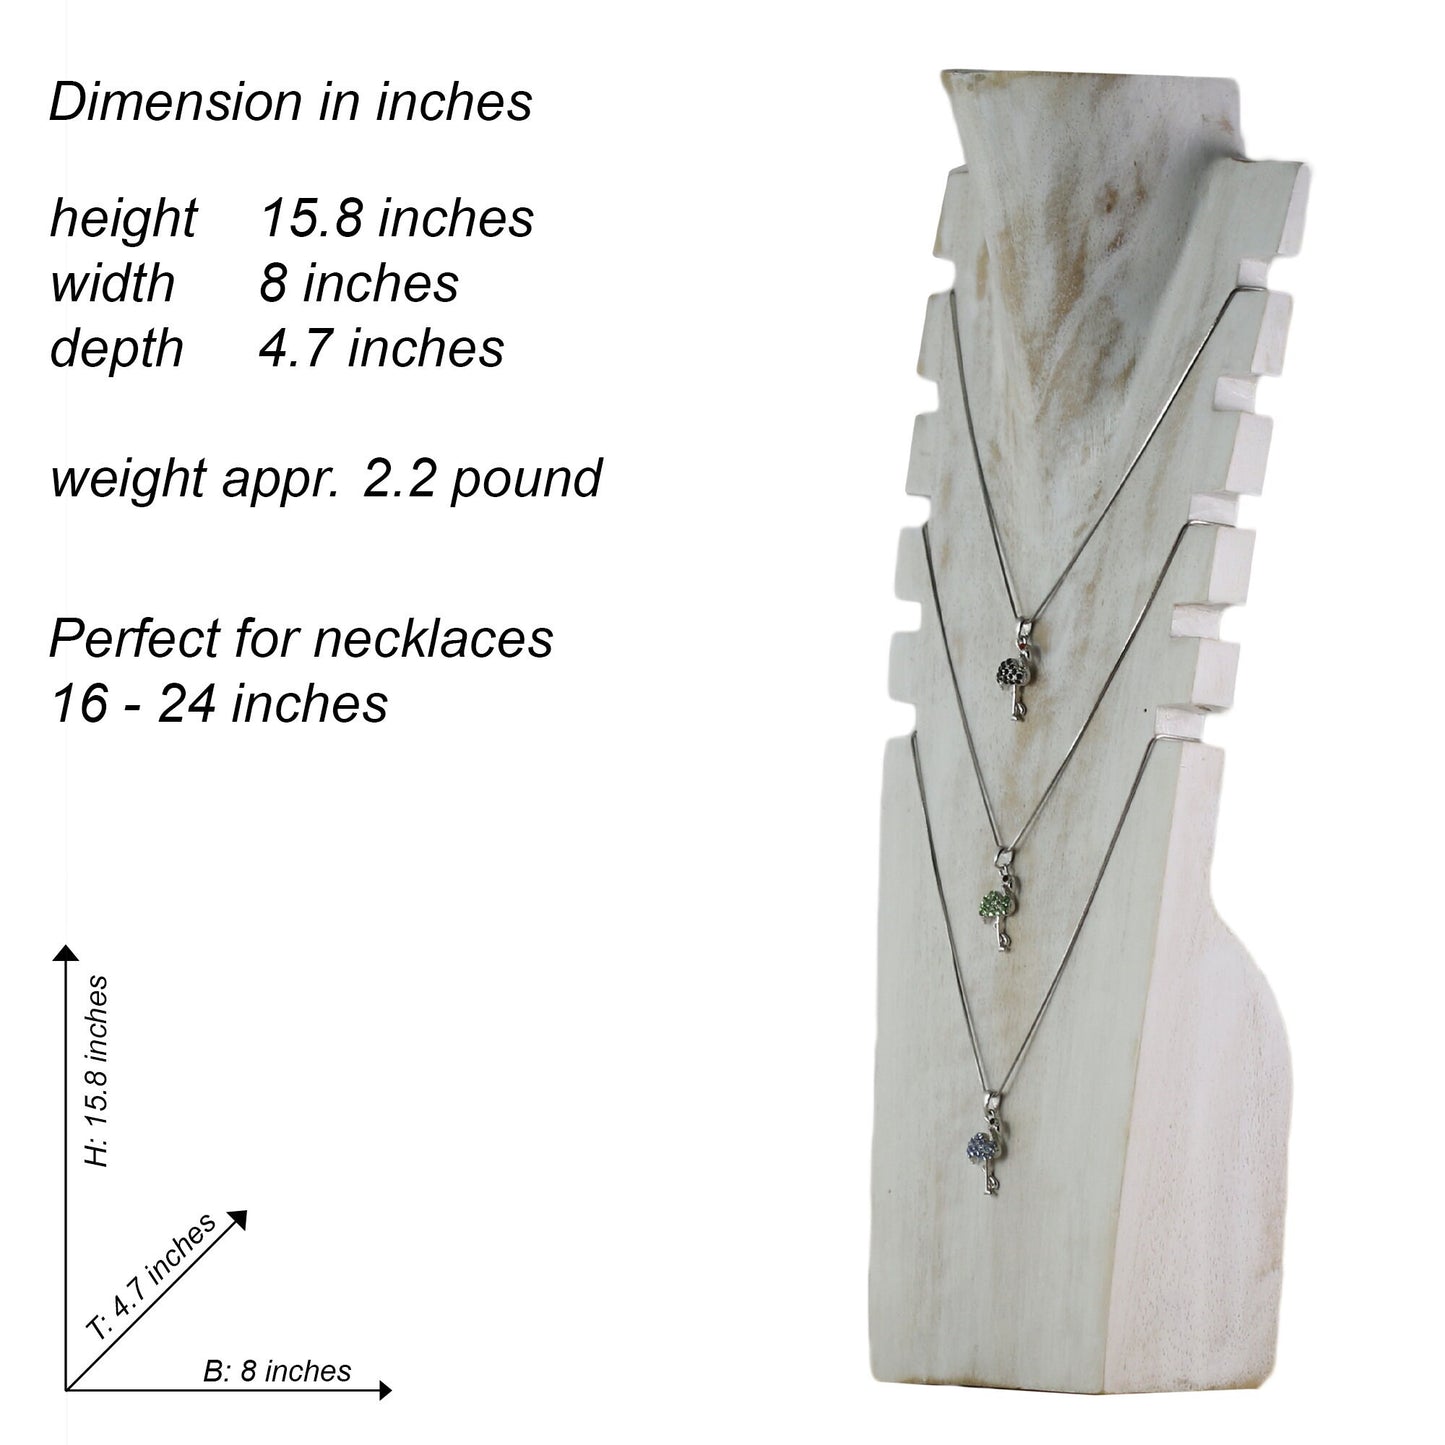 40 cm necklace stand jewelry stand chain display jewelry bust made of wood for several necklaces White wash